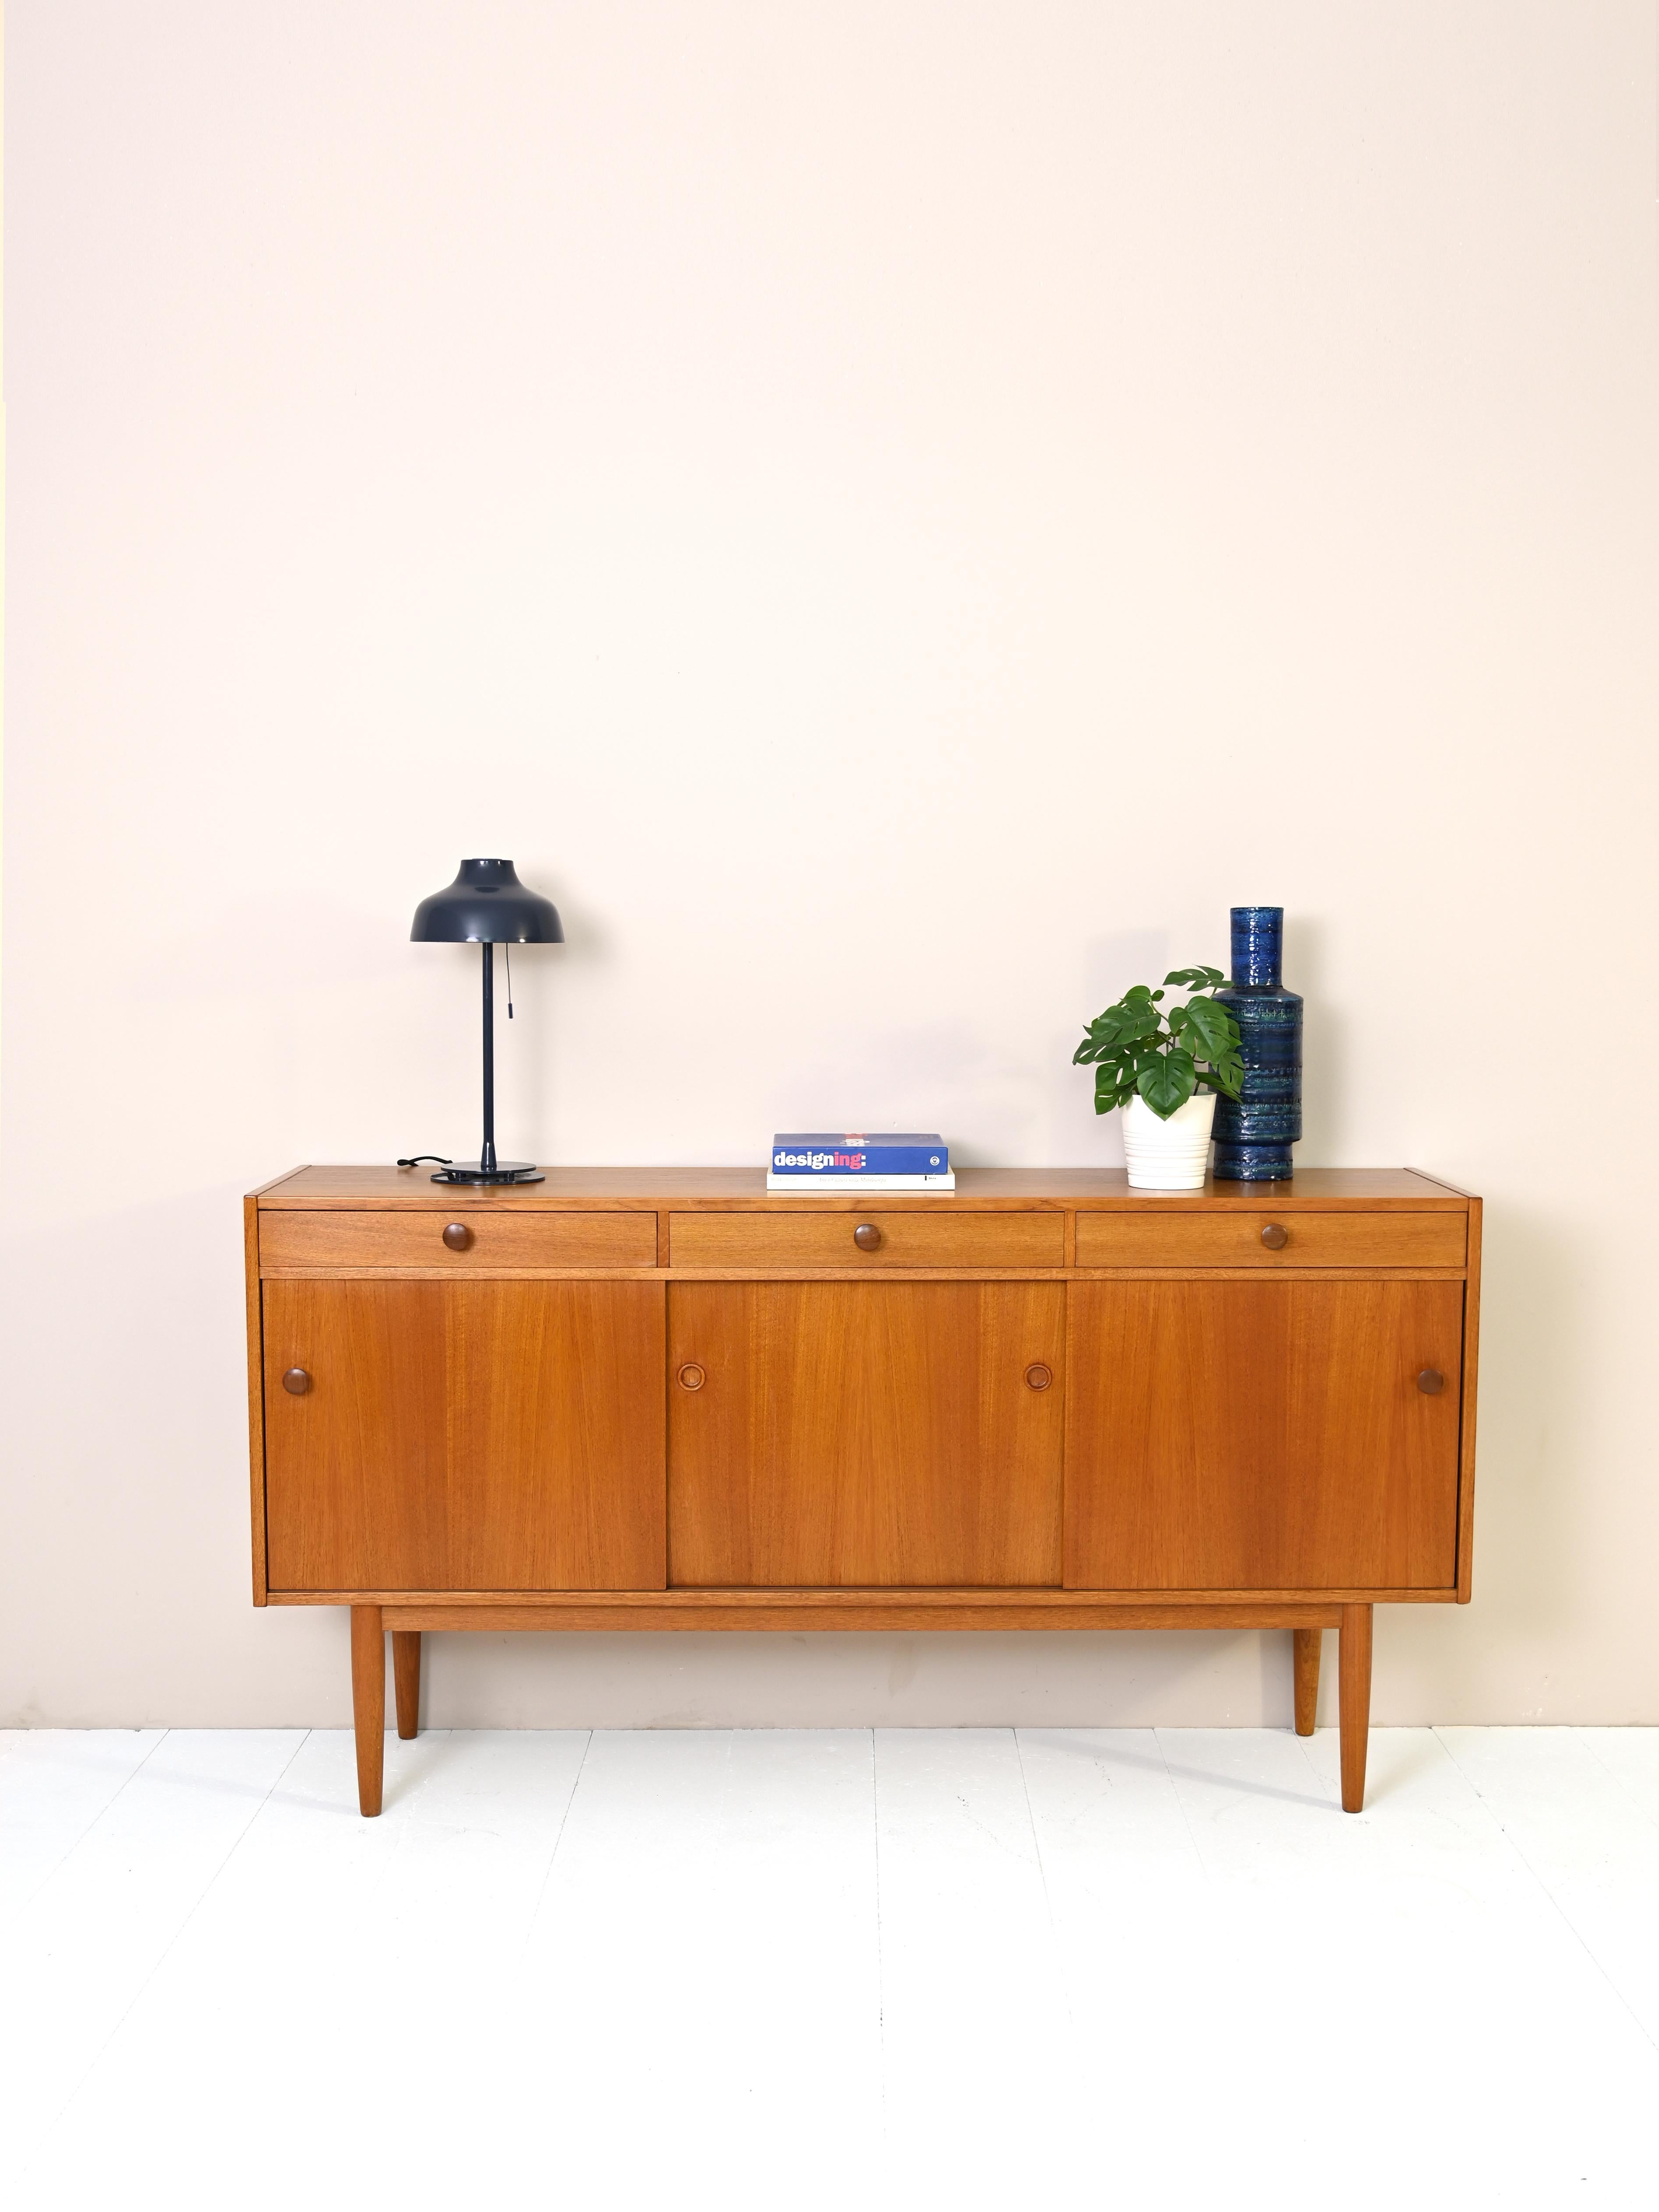 Scandinavian sideboard with stamp of authenticity.
The cabinet features three drawers with wooden knobs and three sliding doors. Inside are three
compartments equipped with a shelf respectively.
The long conical legs give lightness to the